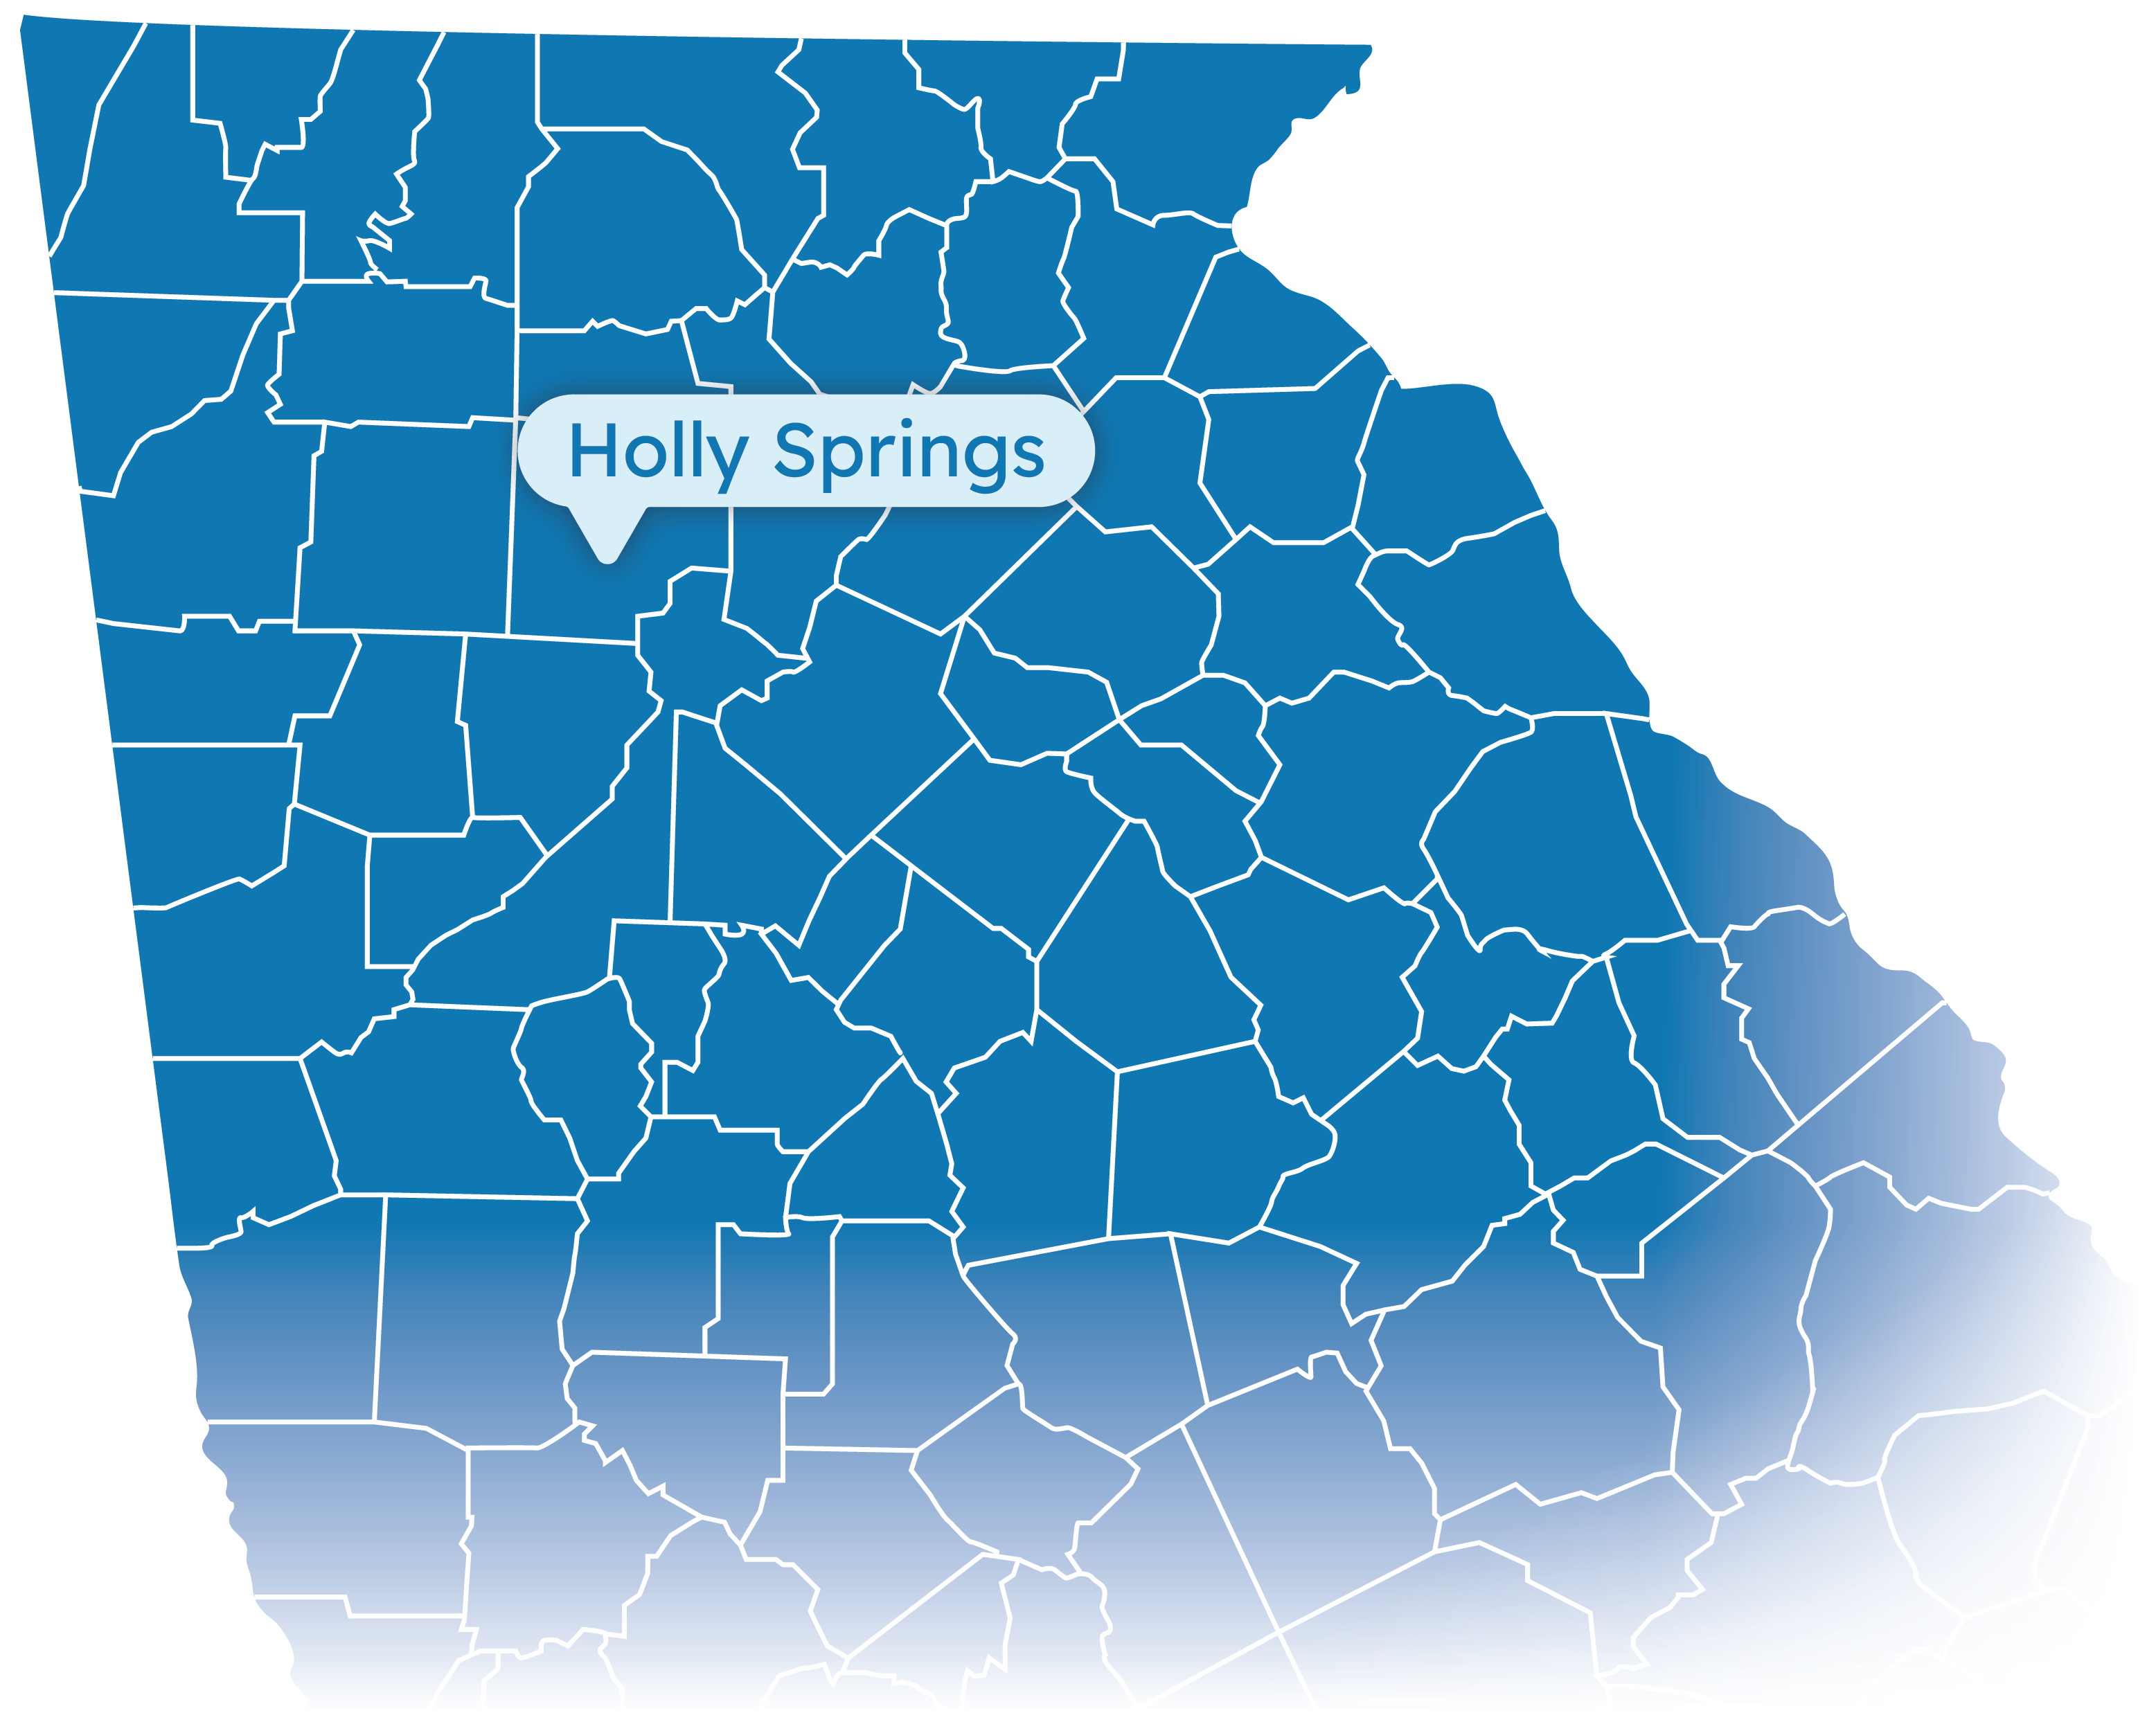 Map of Georgia with Holly Springs highlighted